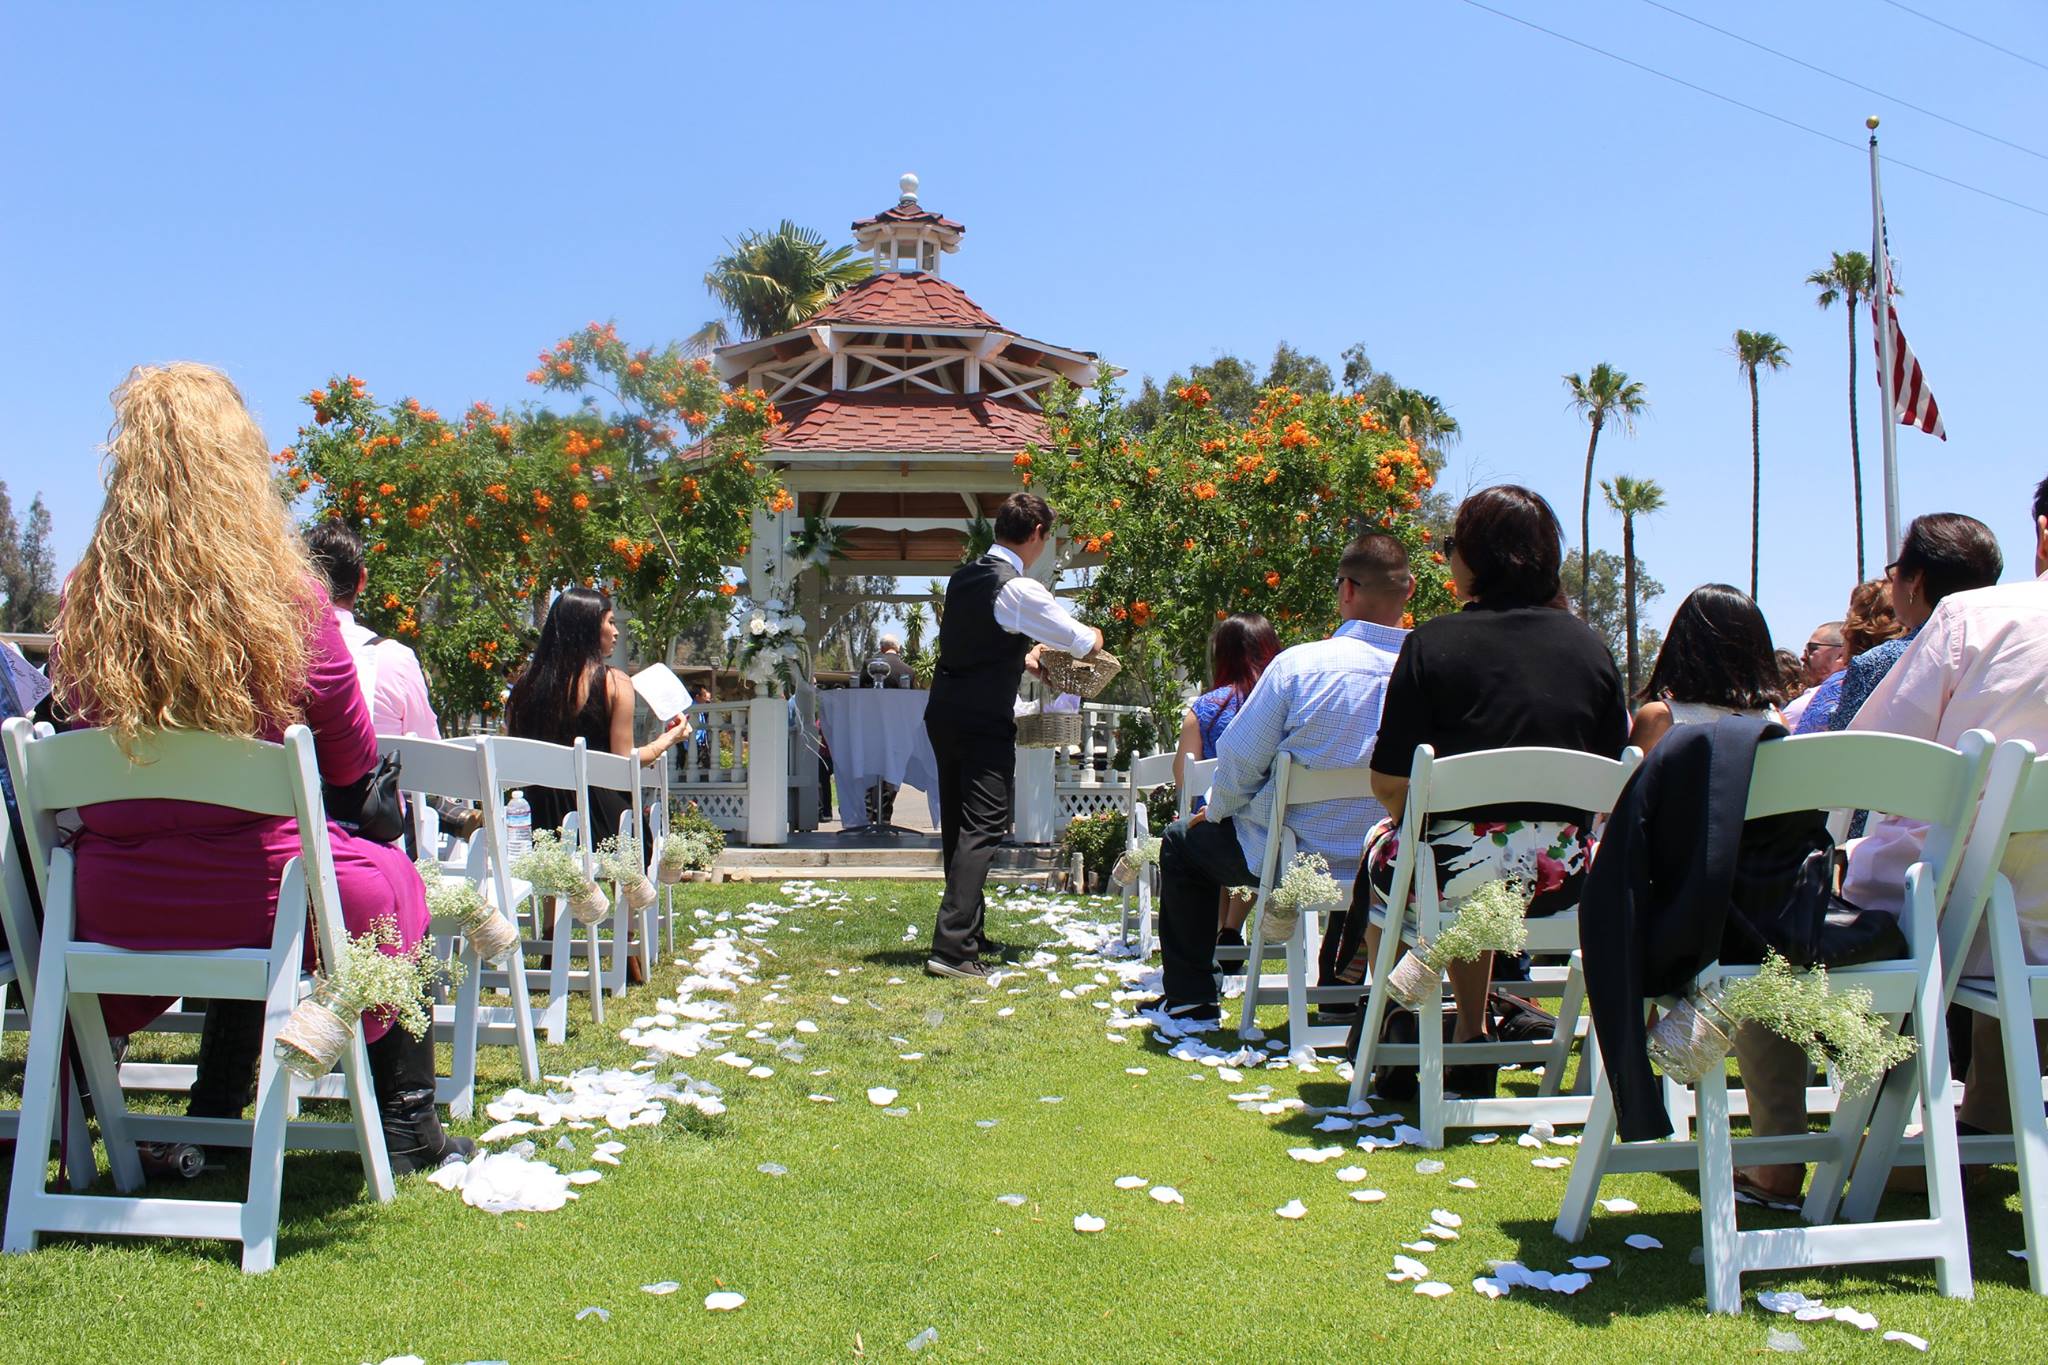 Wedding aisle for ceremony at golf course